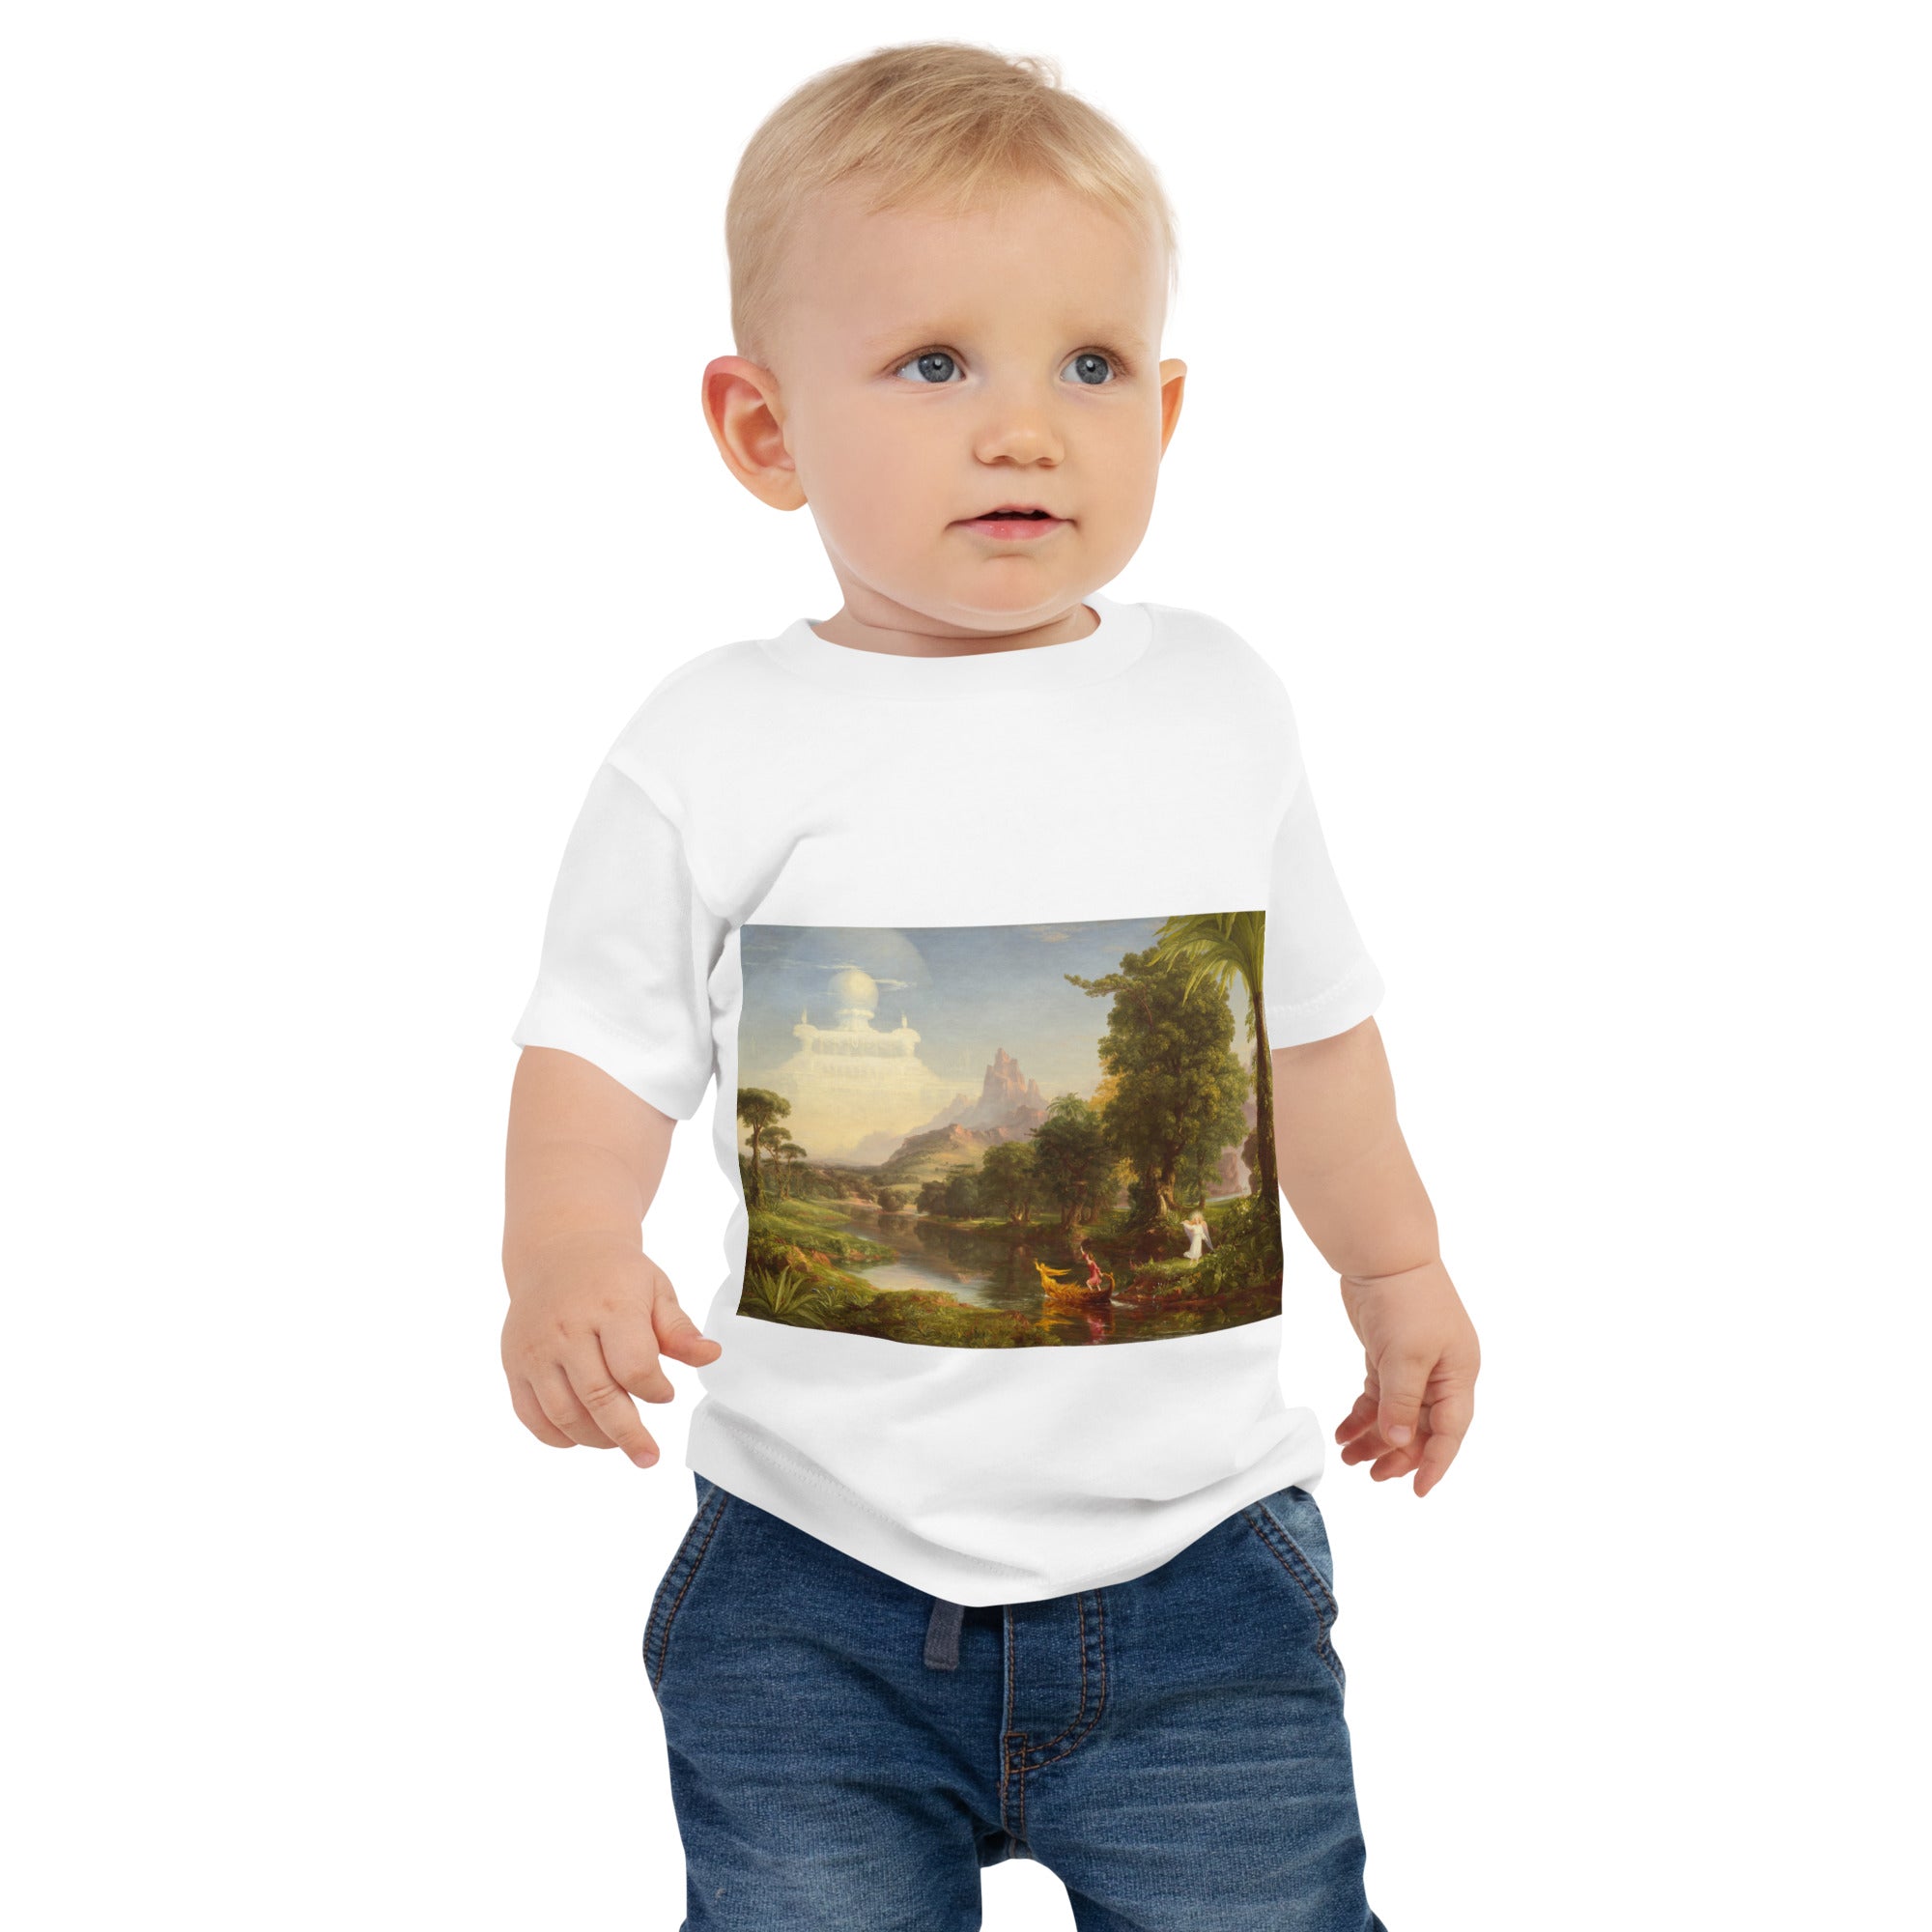 Thomas Cole 'The Voyage of Life: Youth' Famous Painting Baby Staple T-Shirt | Premium Baby Art Tee